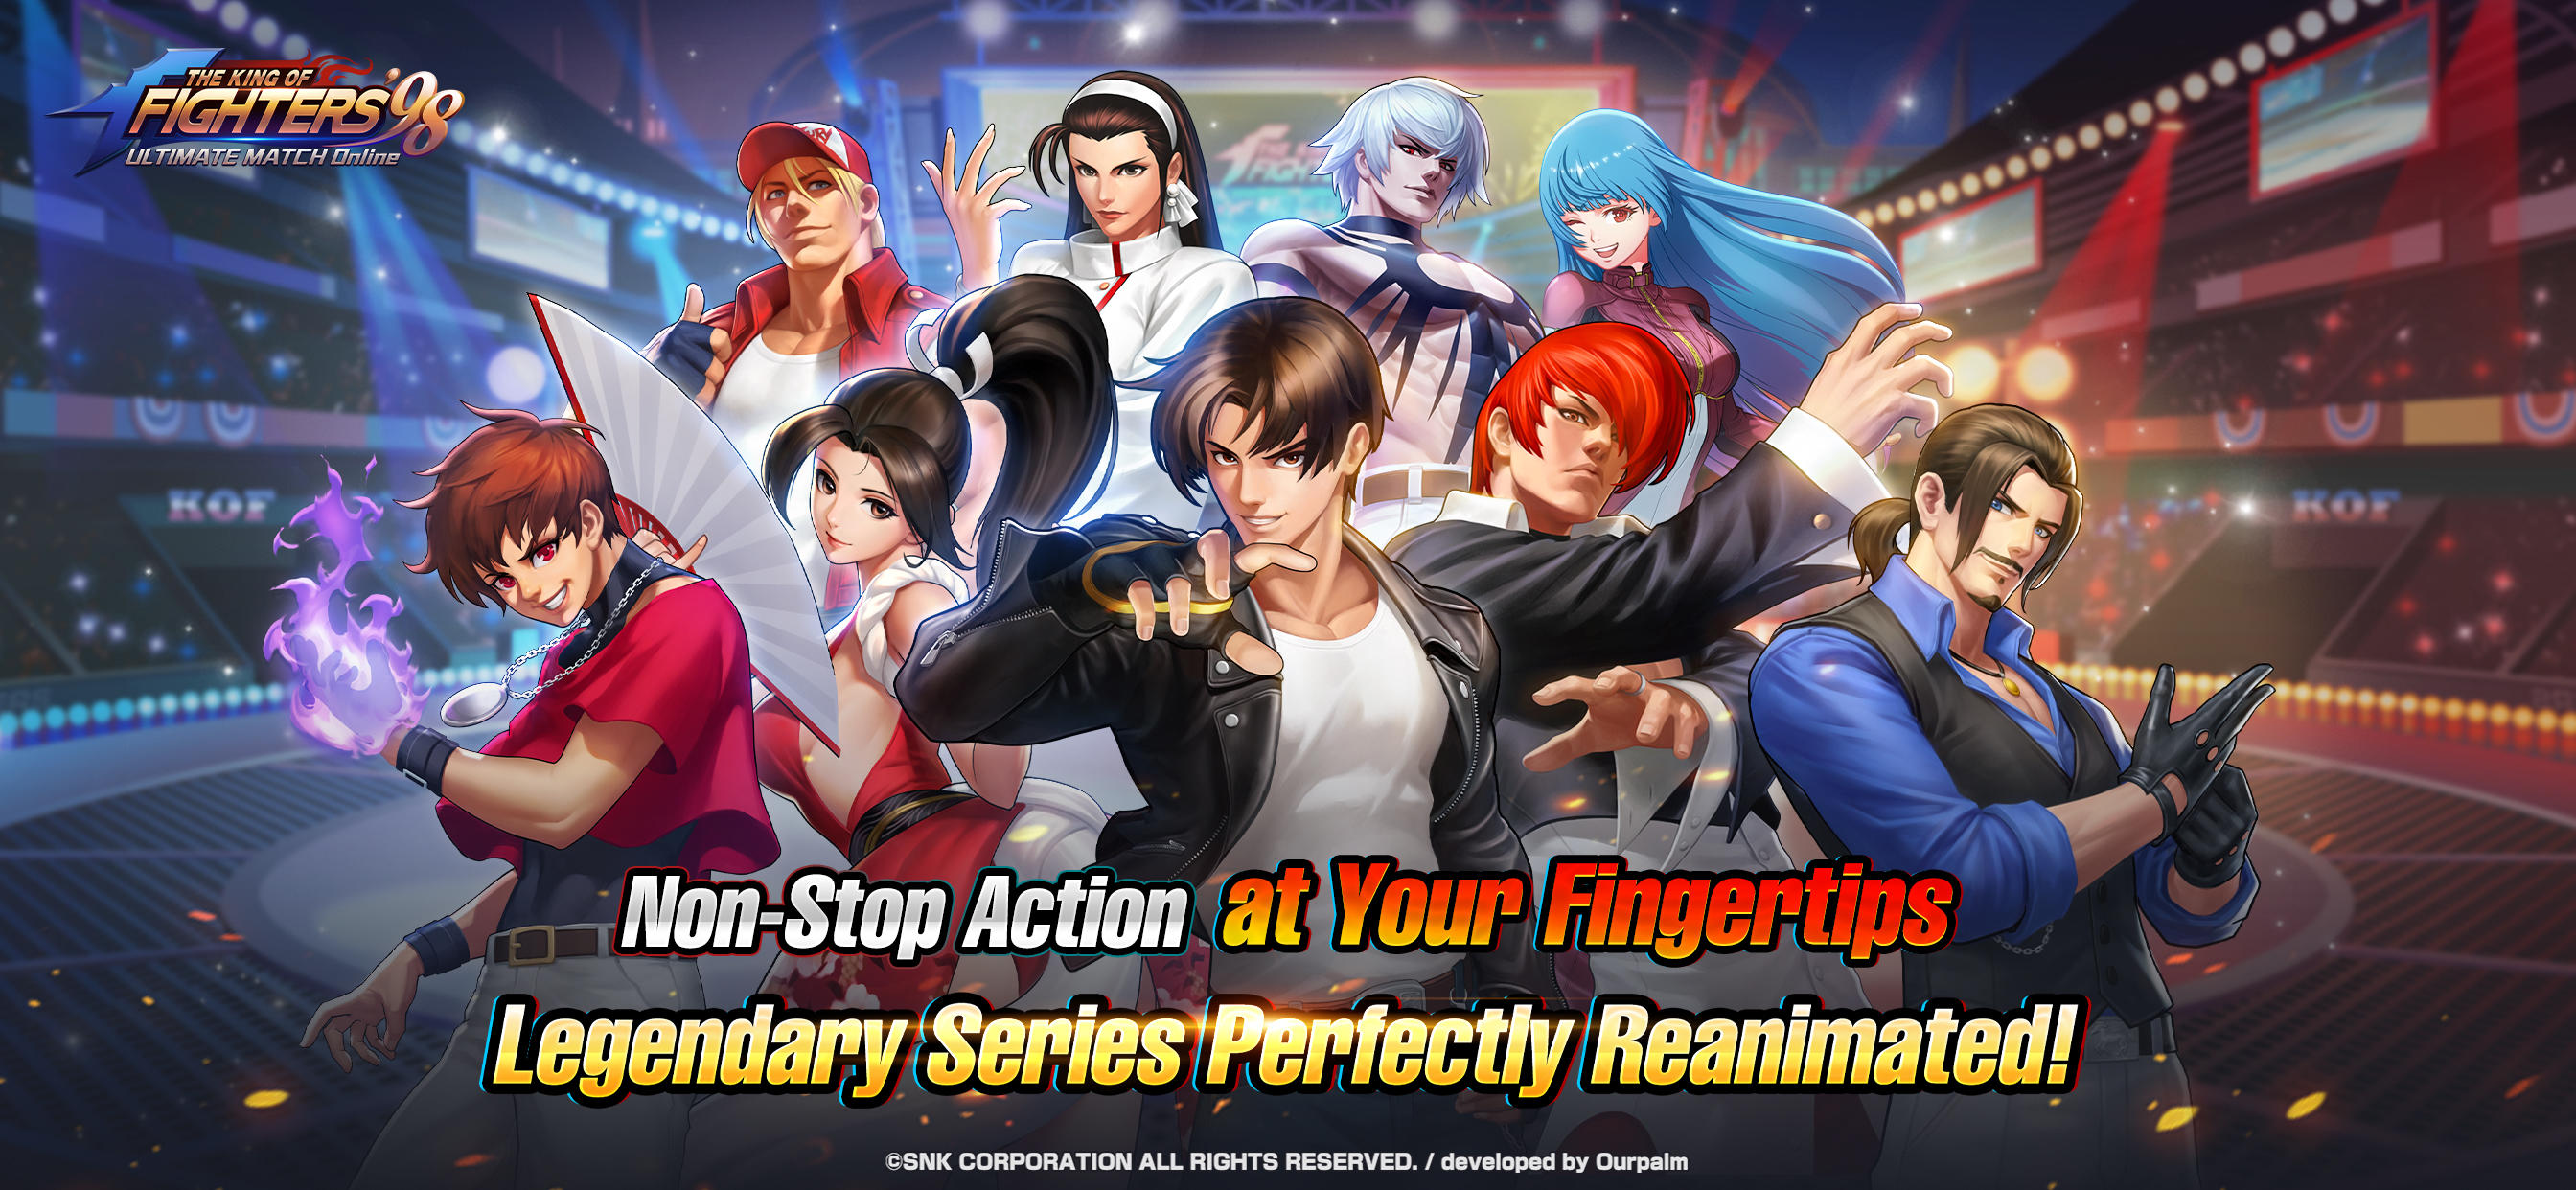 King Fighter 2 v1.1 APK for Android